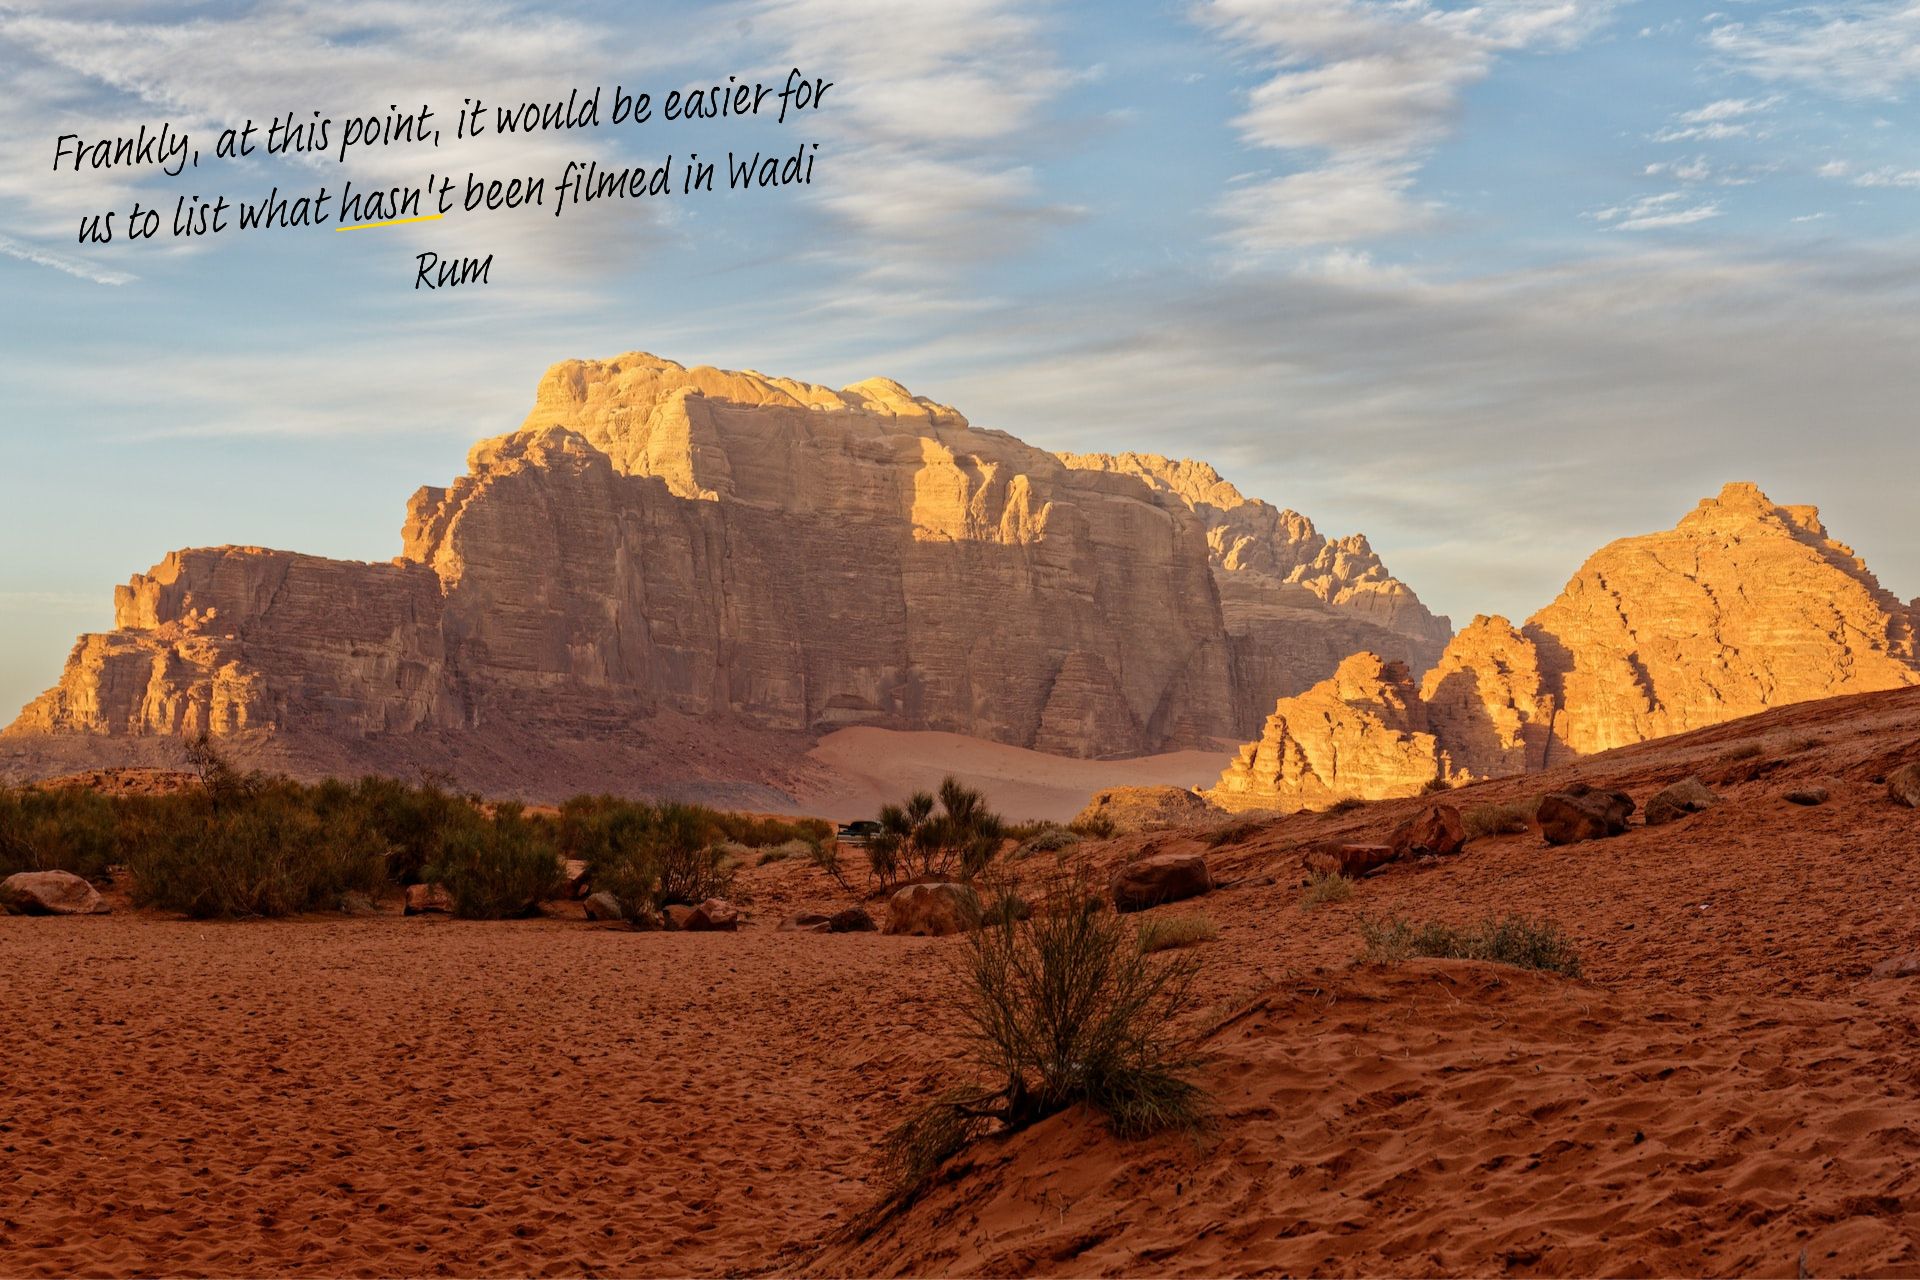 Wadi Rum in Jordan. A large rock formation reaches into the sky in the distance.